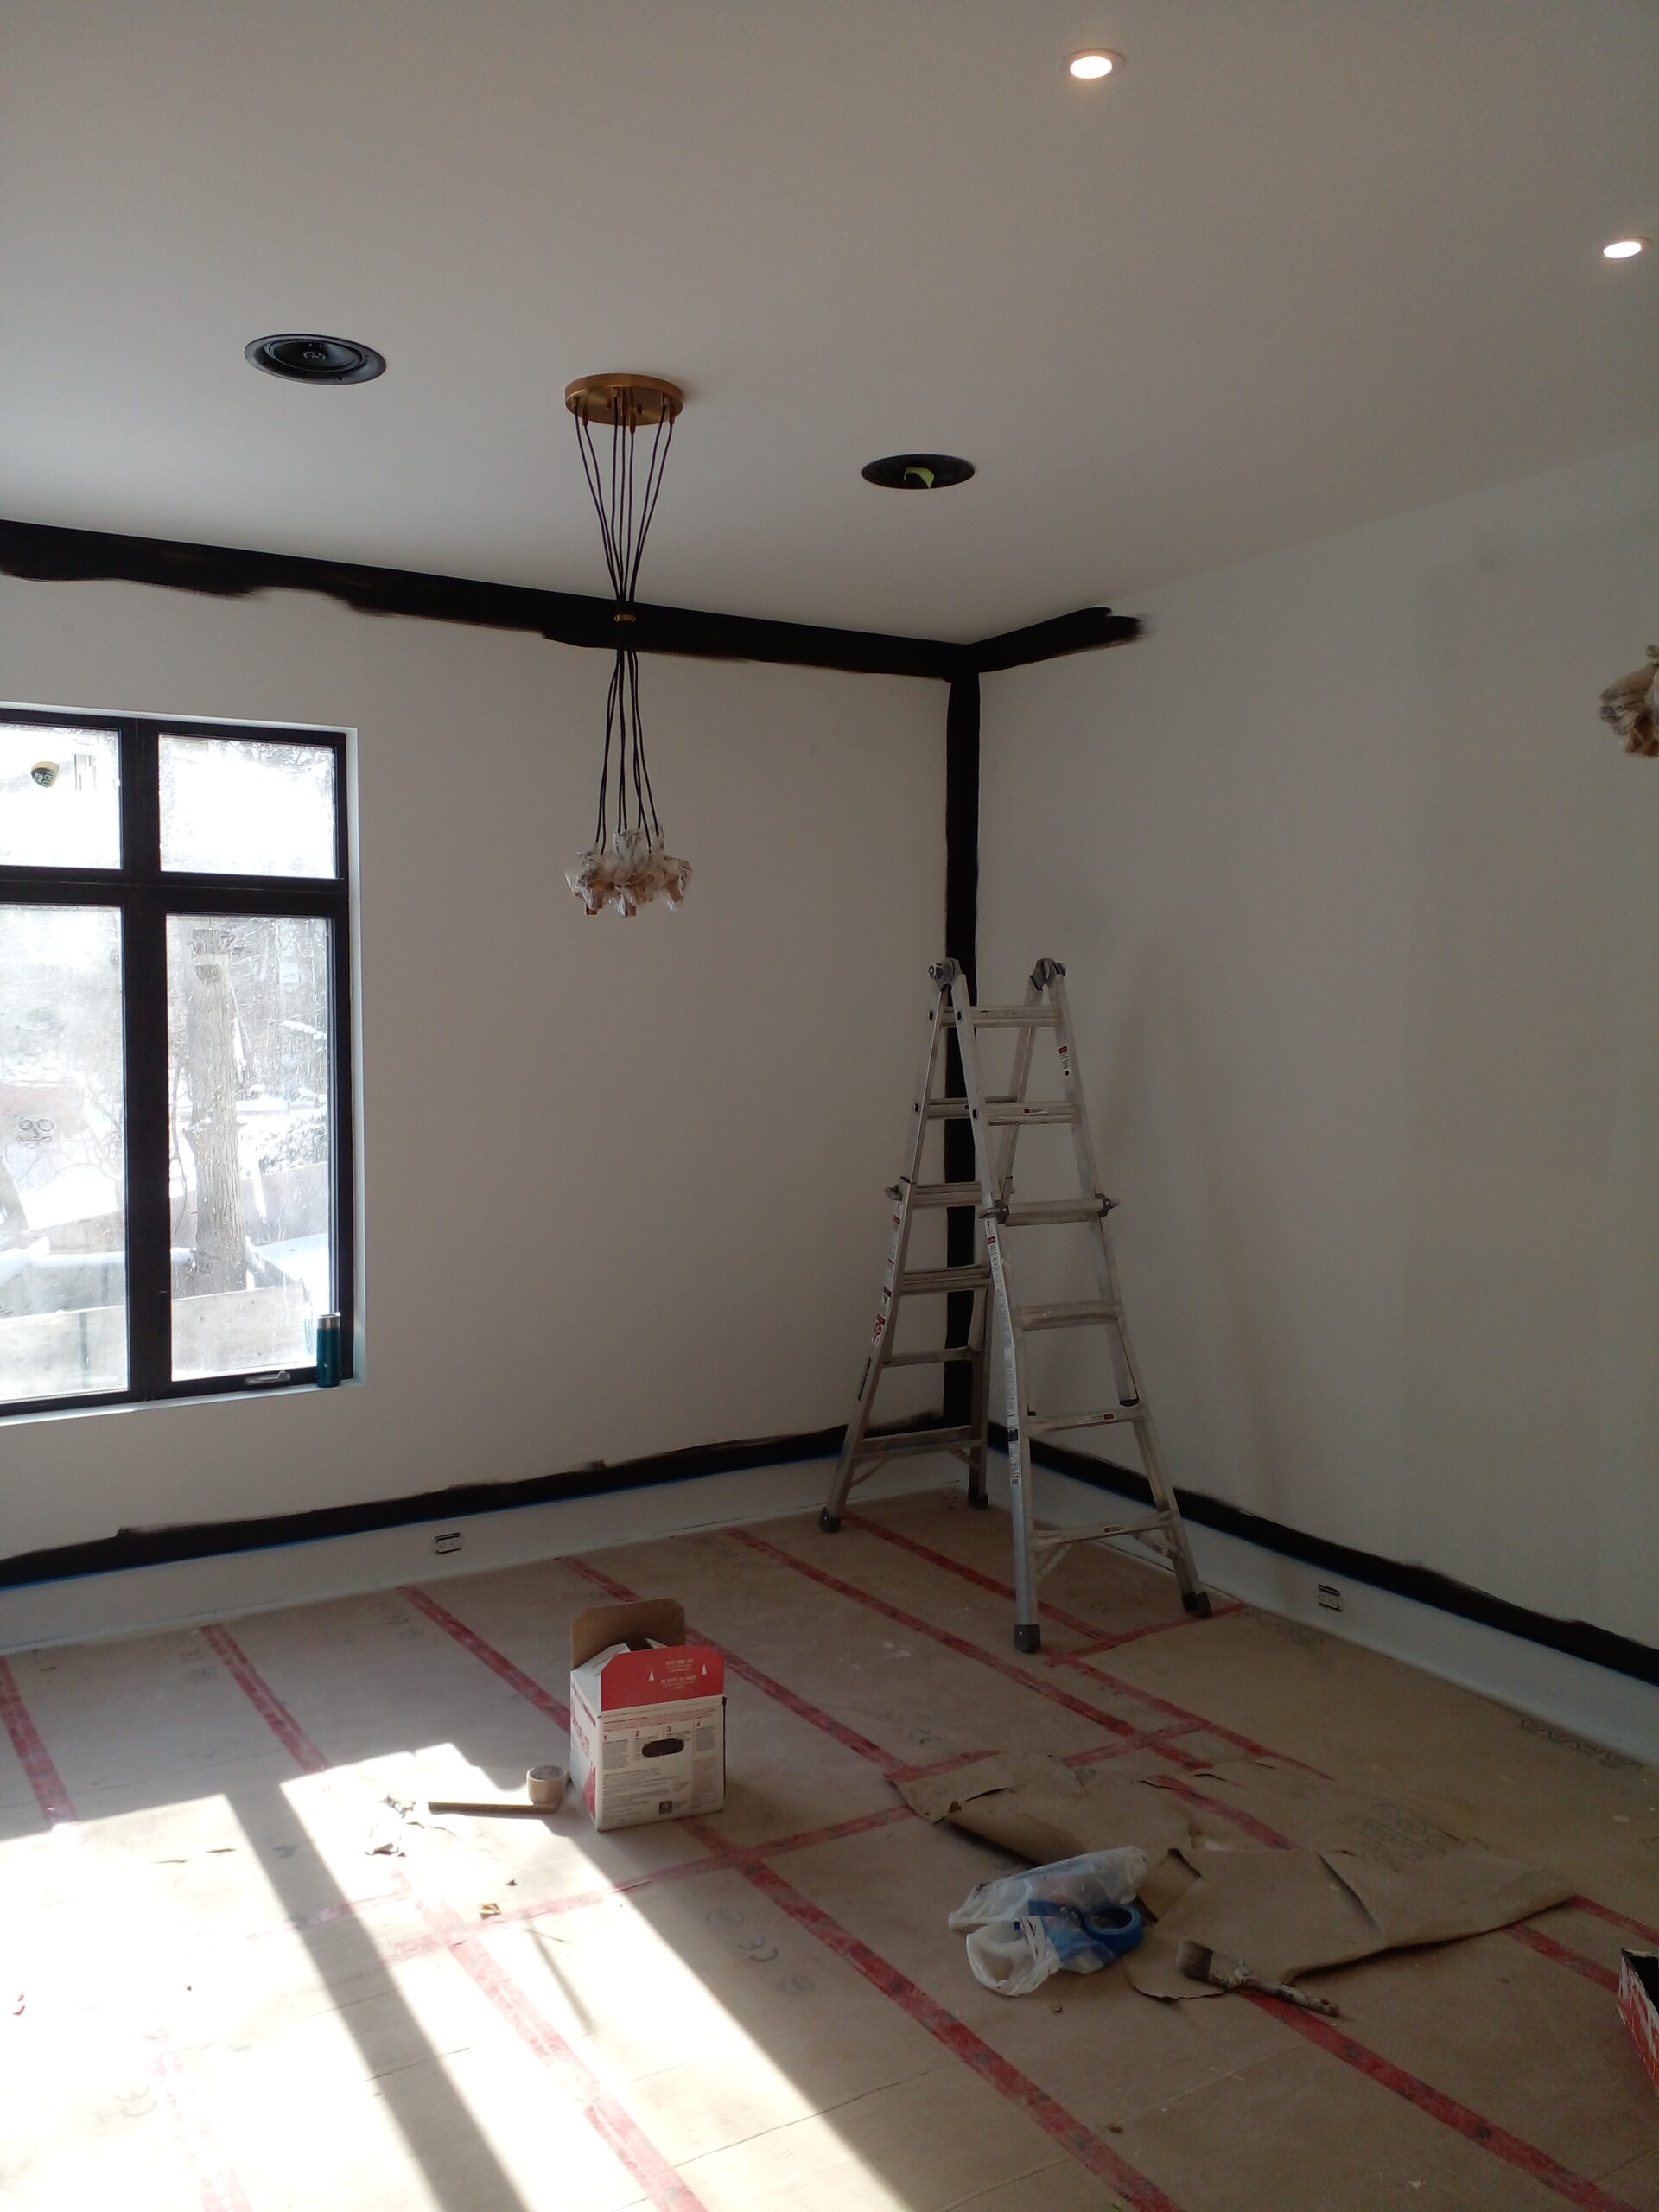 Residential Painting services